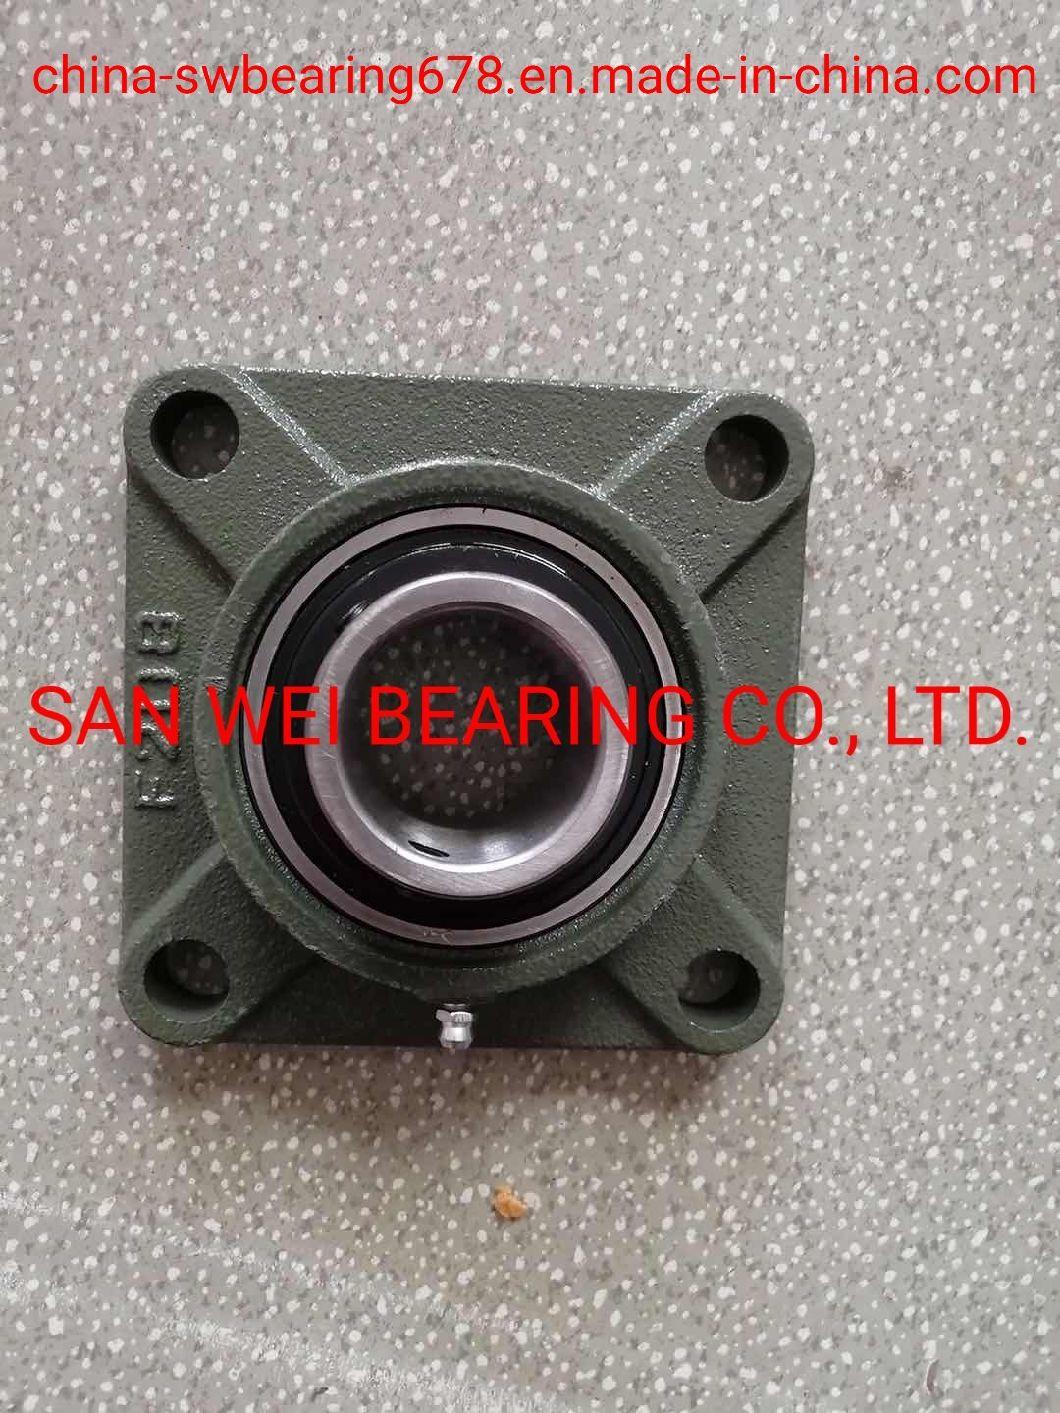 Chrome Steel /Stainless Steel Pillow Block Bearing High Quality UCP205 206 207